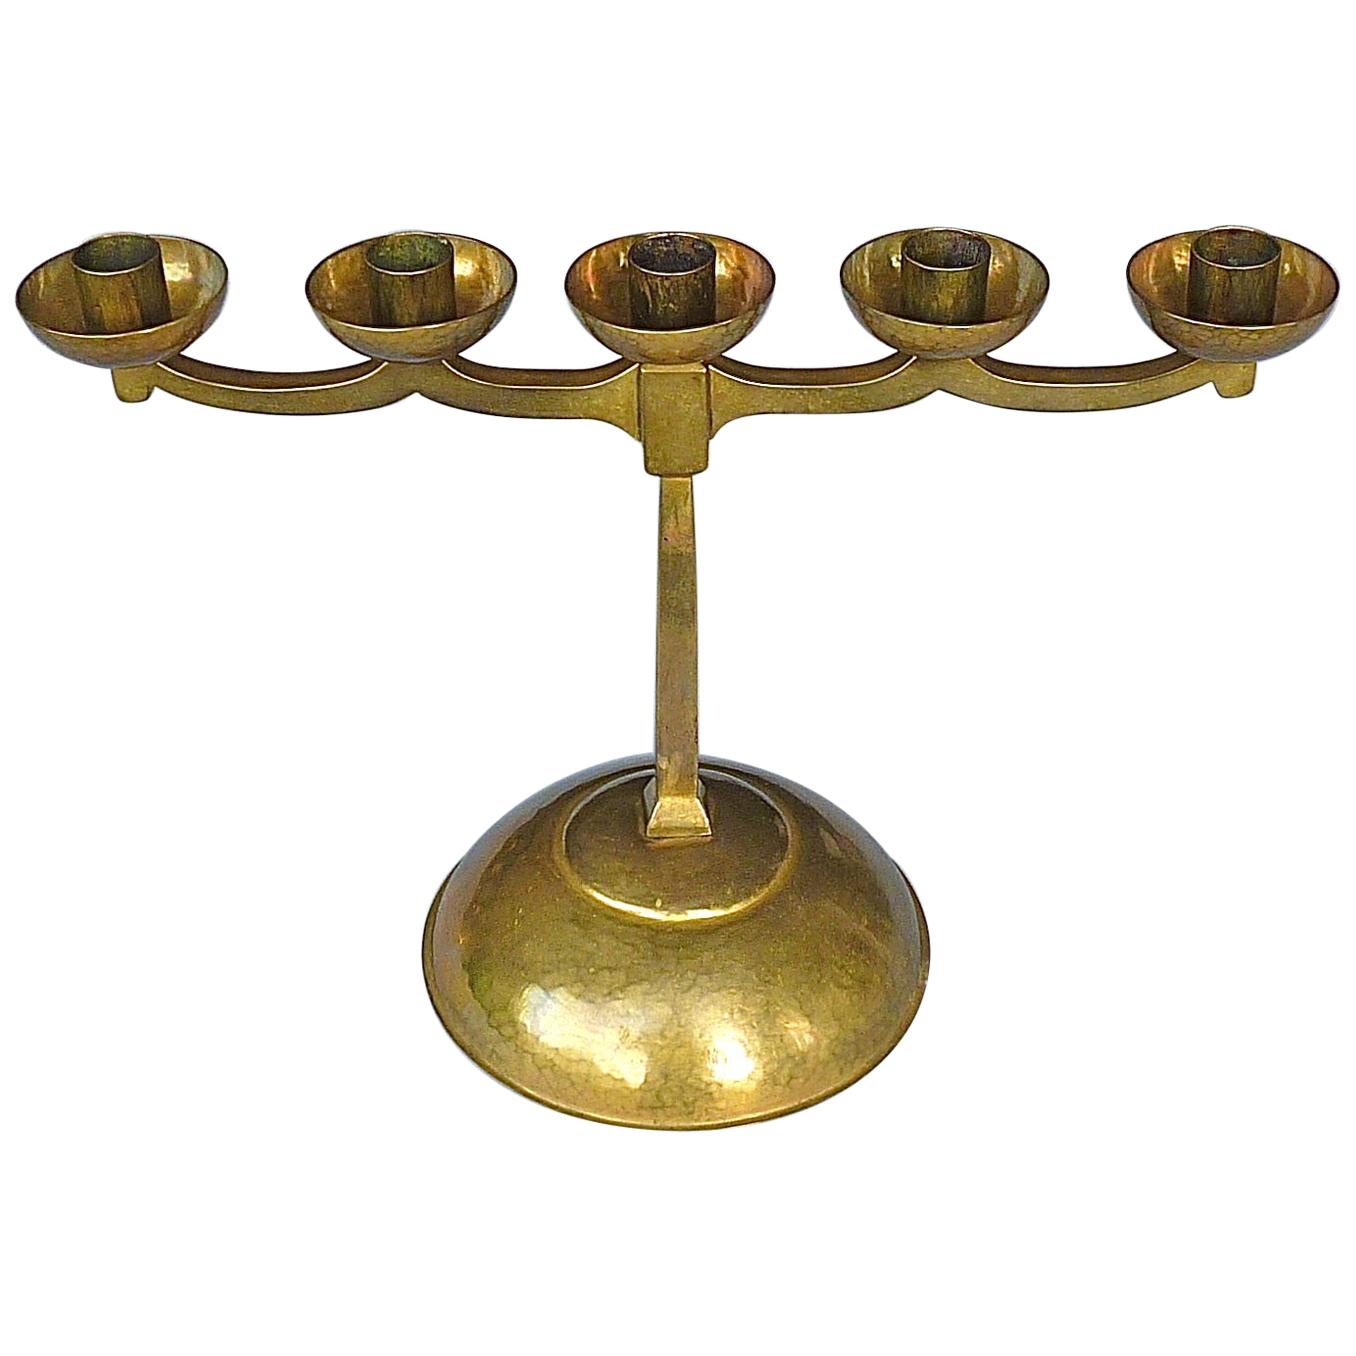 Hand-Chased Brass Bauhaus Art Deco Candle Holder Signed Bohde 1920s Candelabras